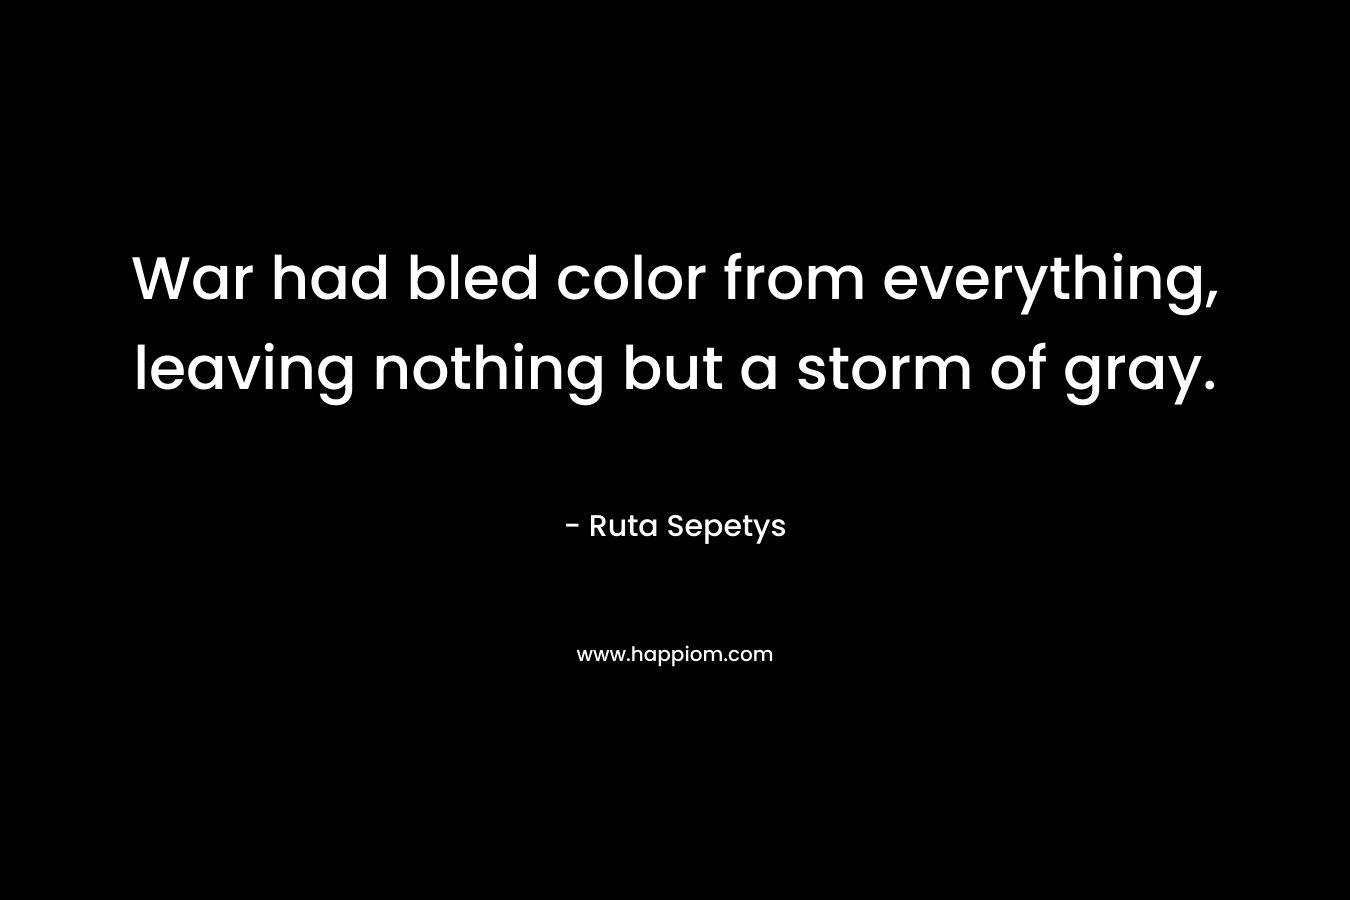 War had bled color from everything, leaving nothing but a storm of gray.